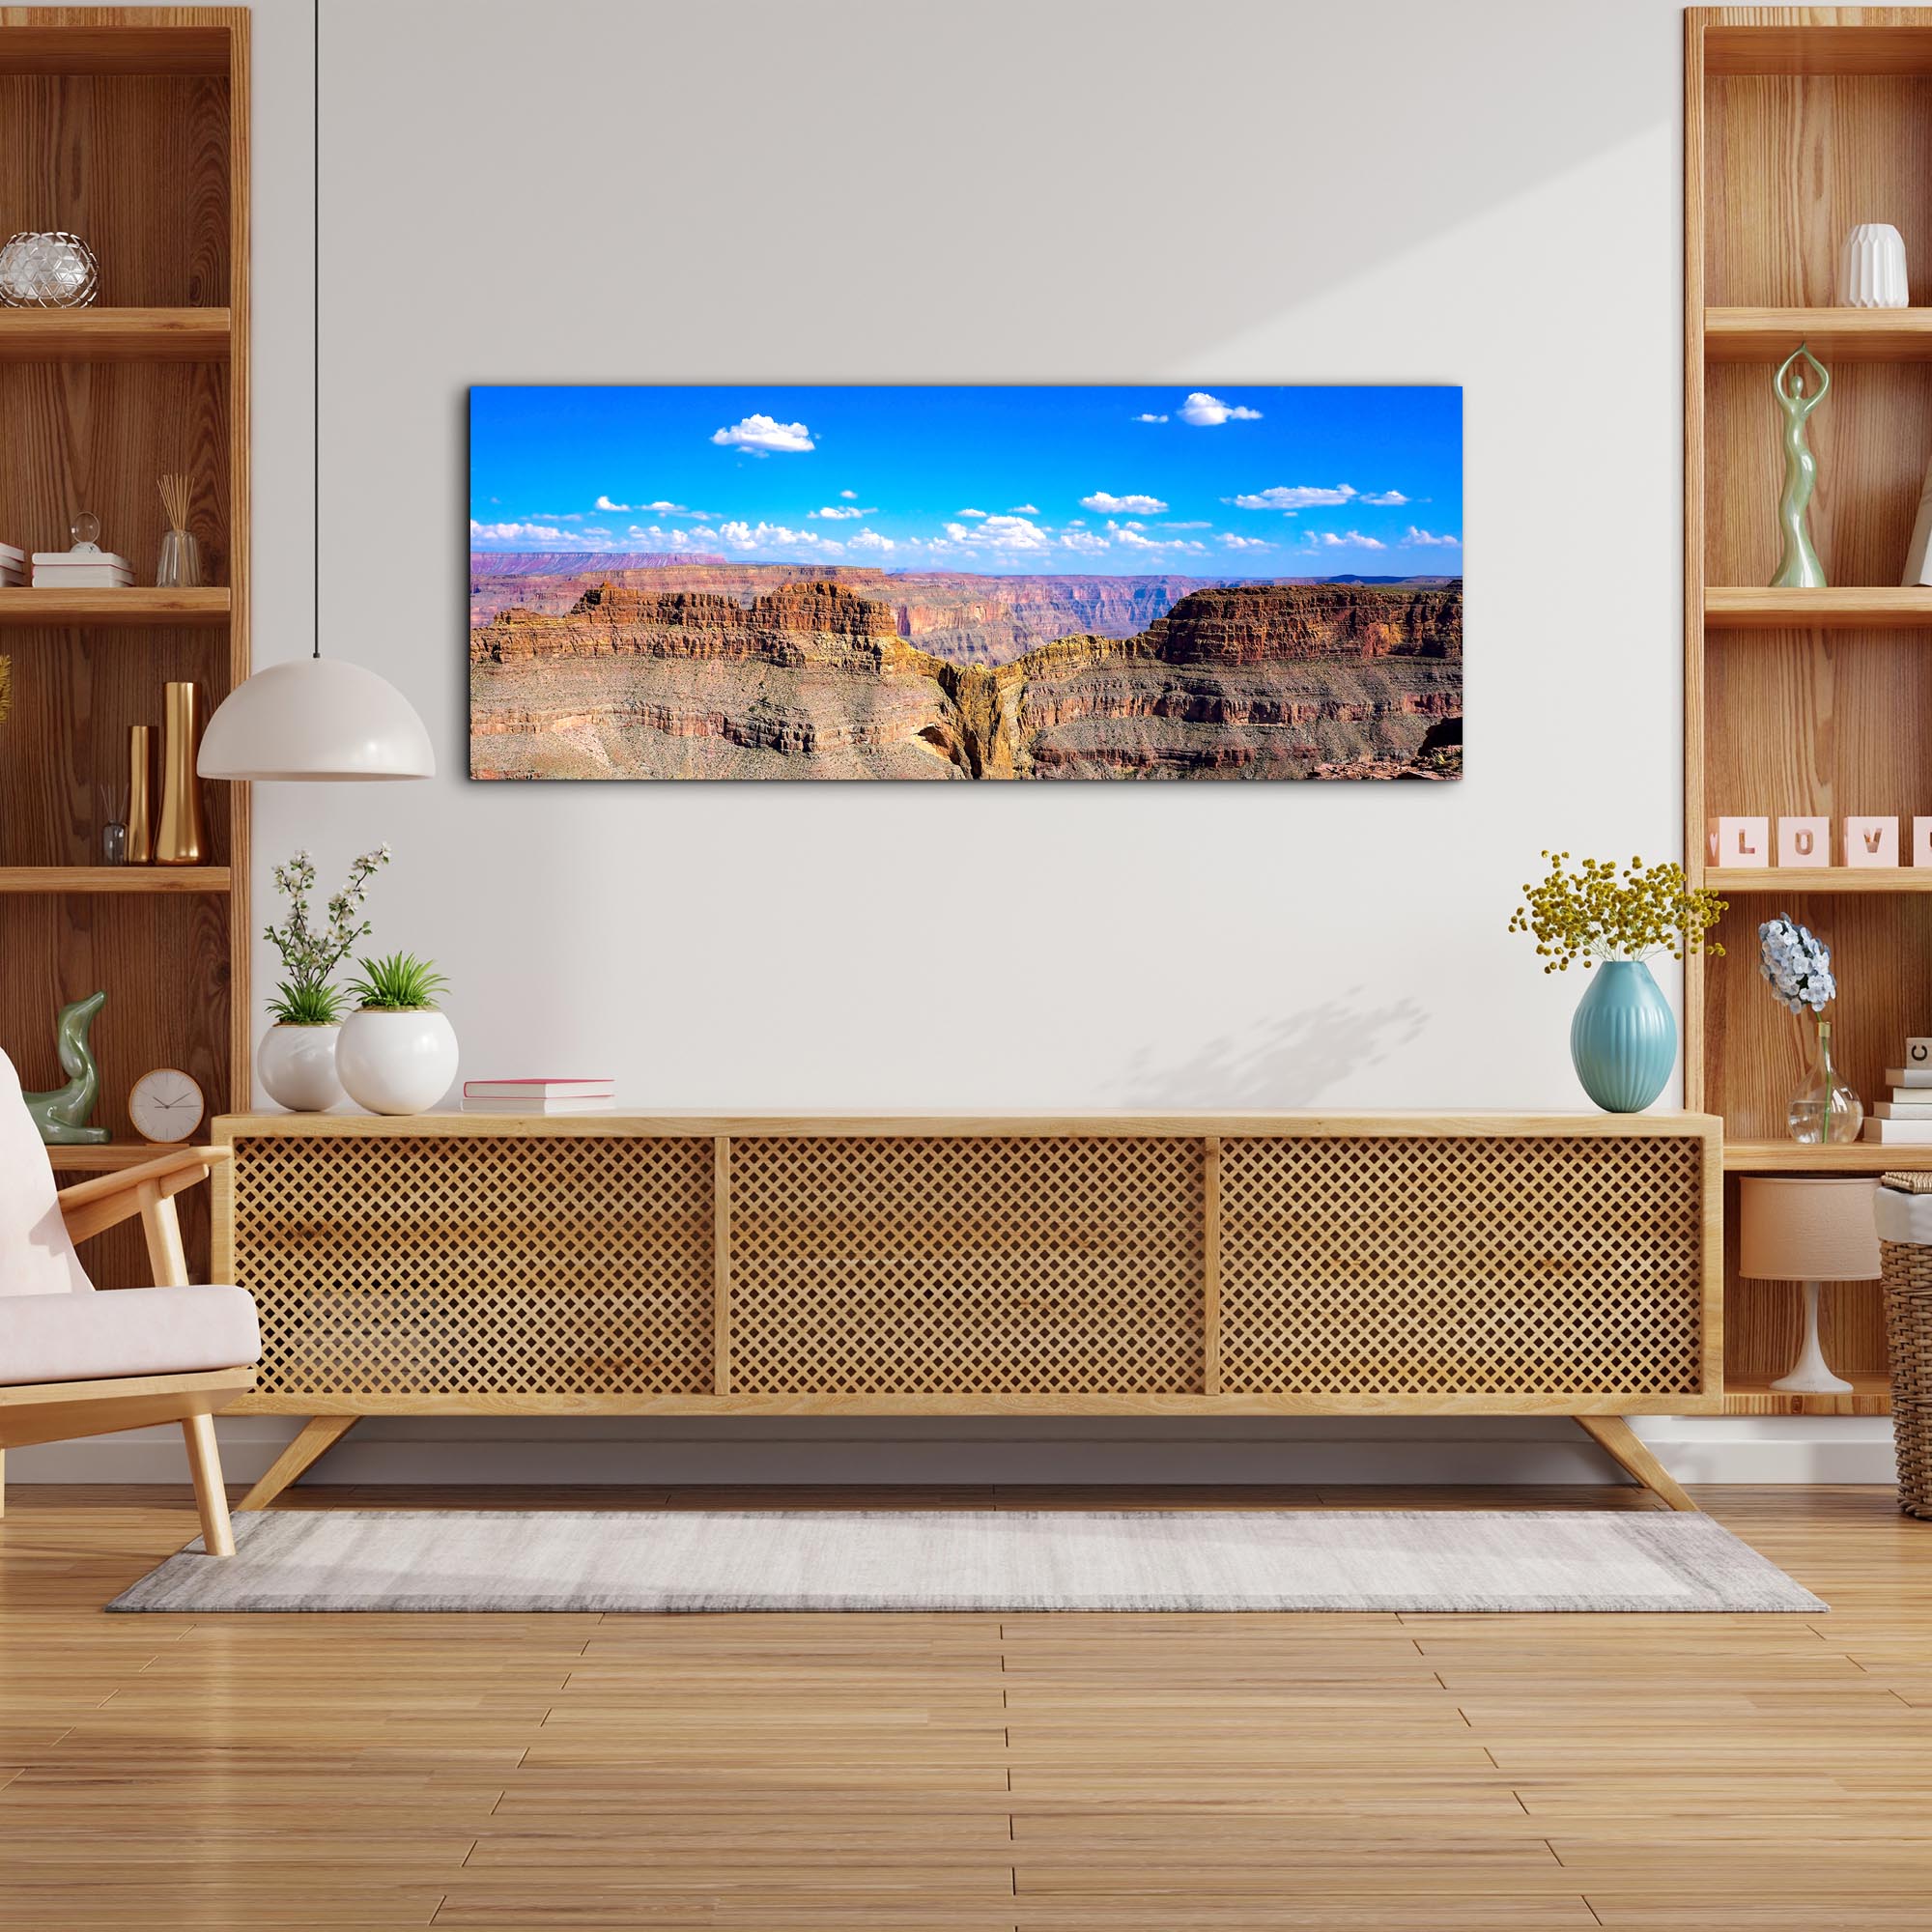 Grand Canyon Expanse by Adam Utz - Desert Art, Southwestern Decor (48in x 19in) - Lifestyle View